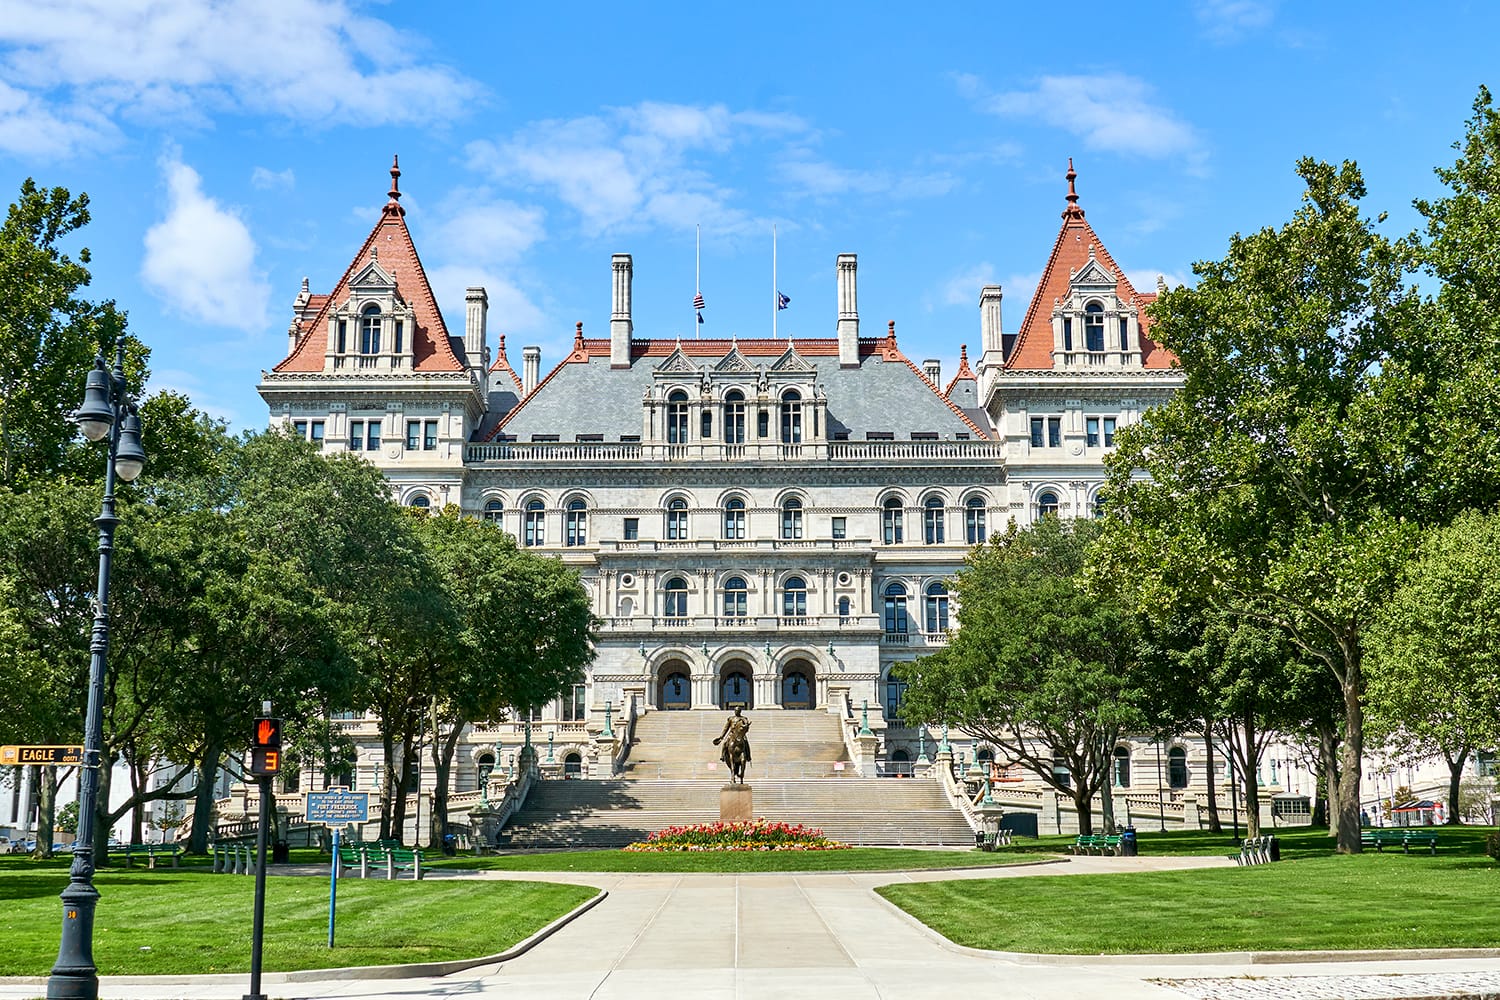 The New York State Capitol in Albany, NY, USA